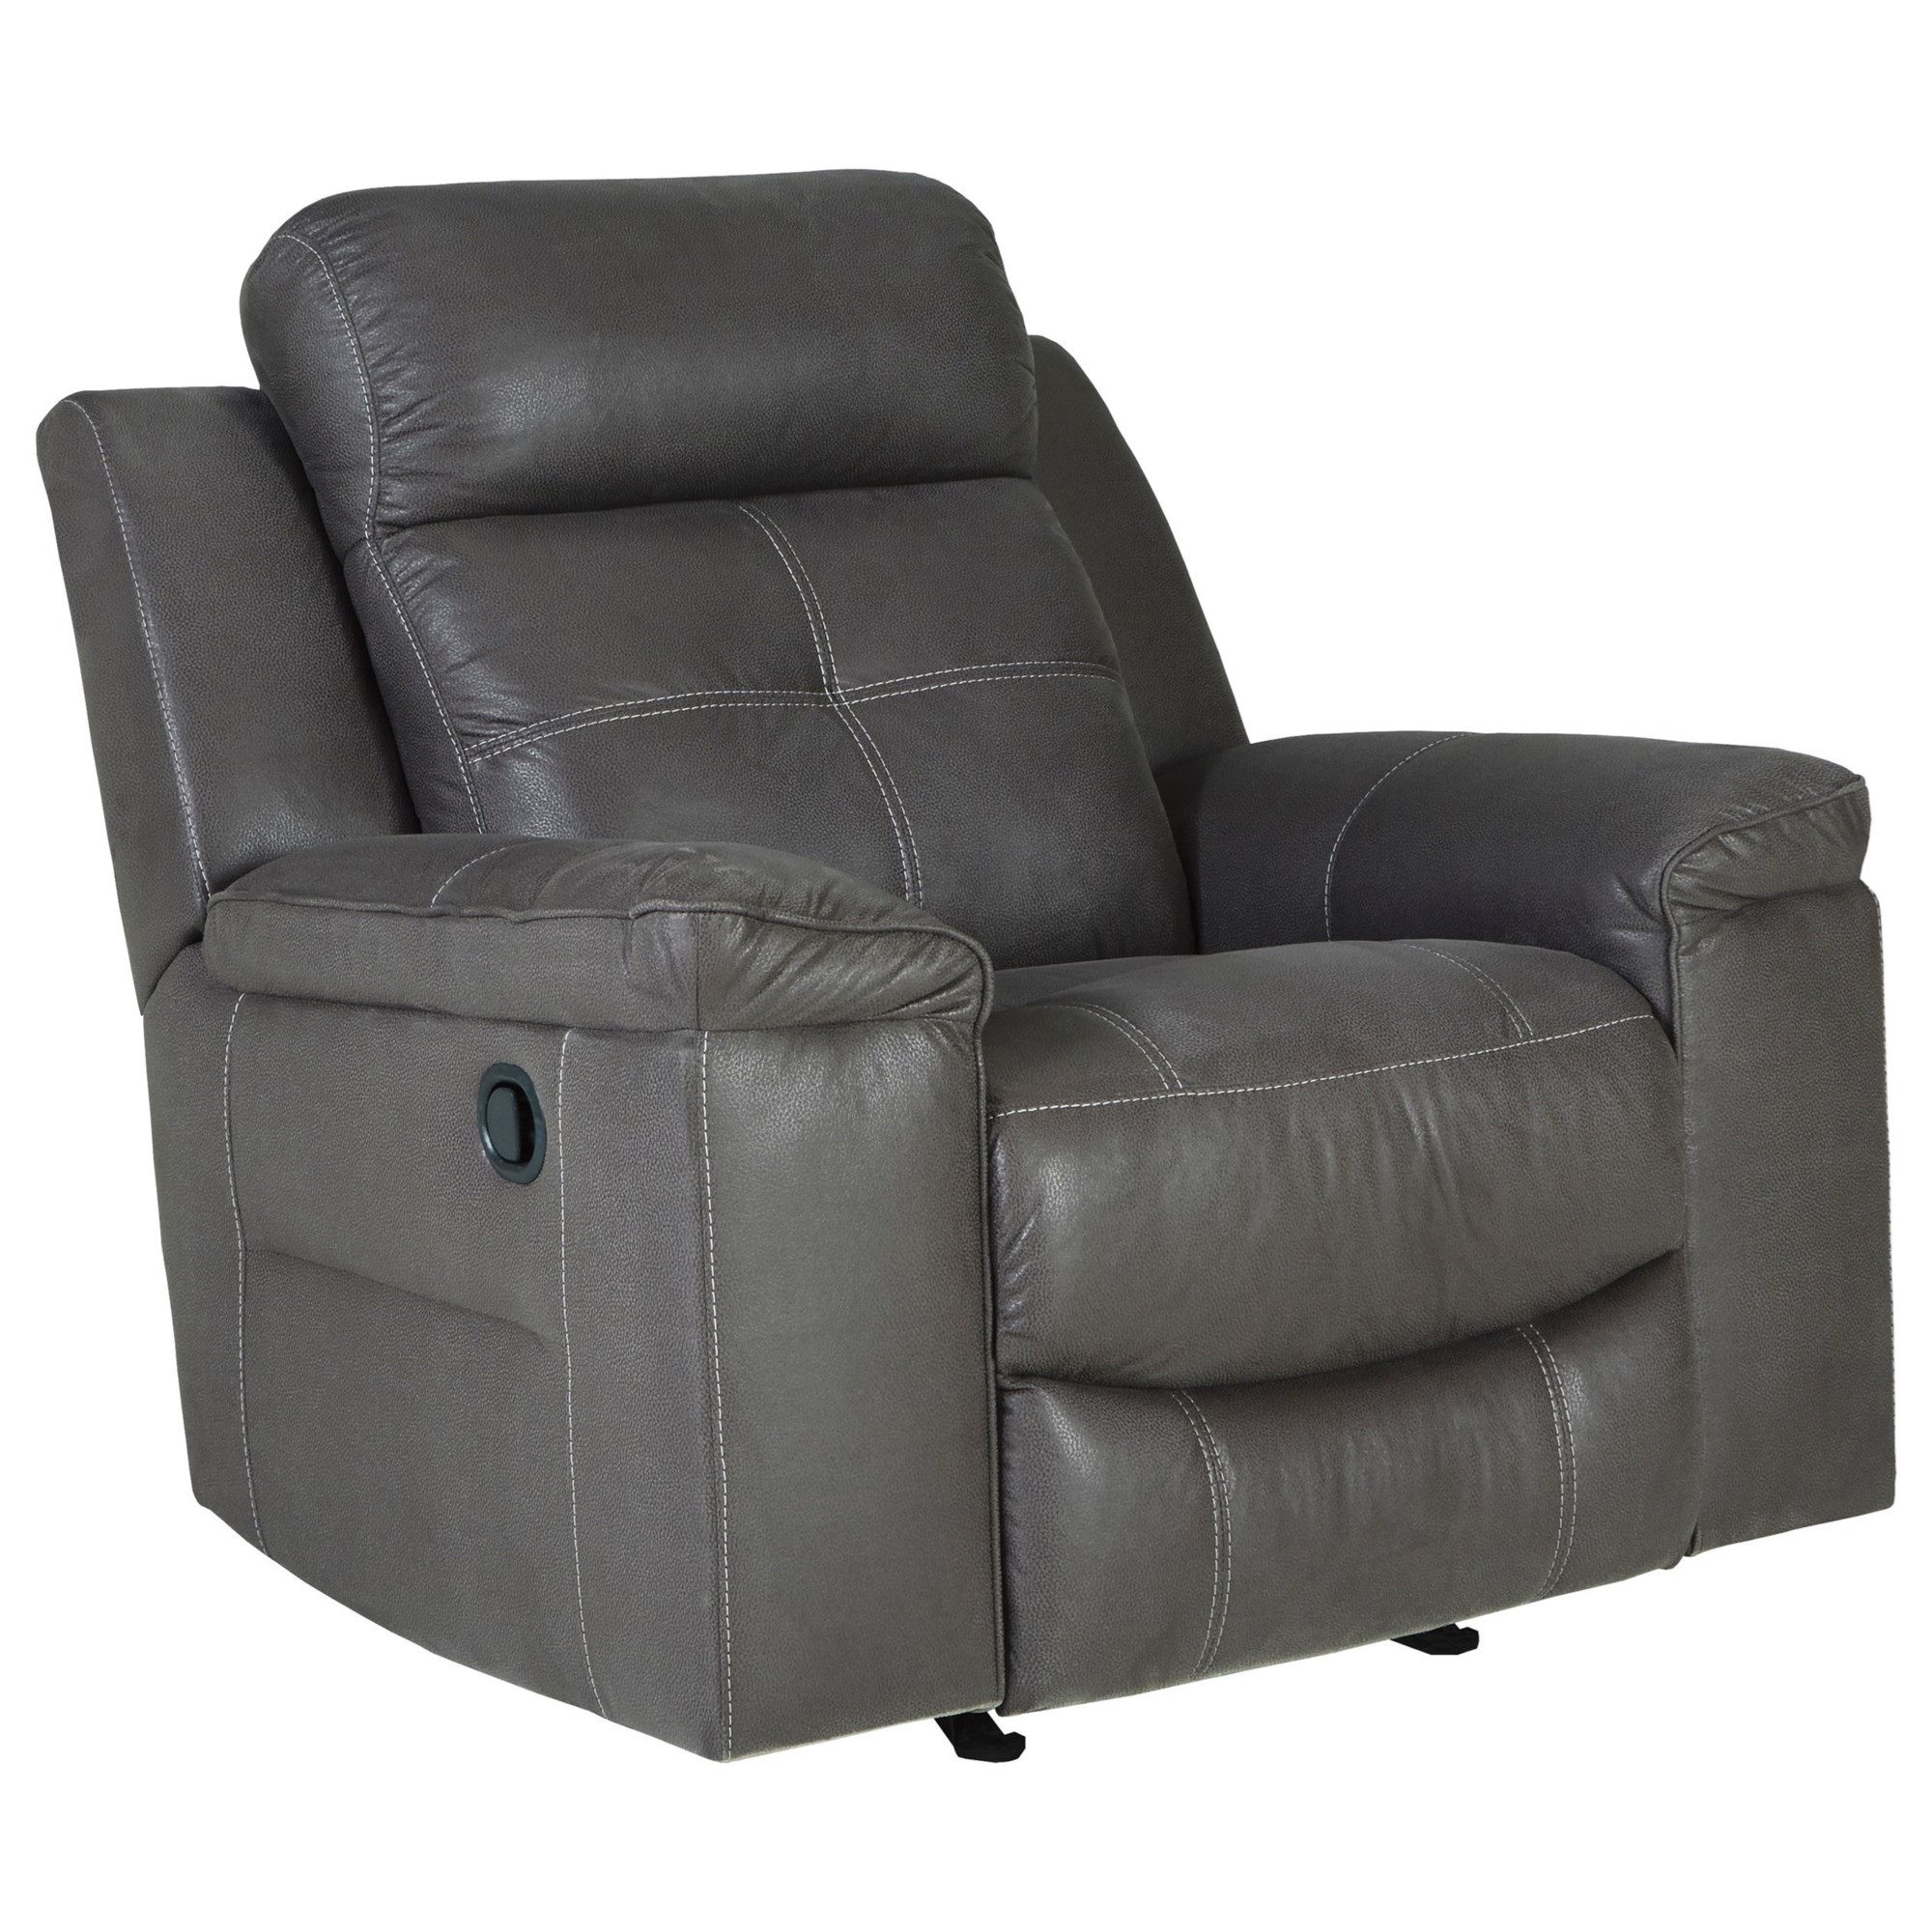 Cushions For Recliners